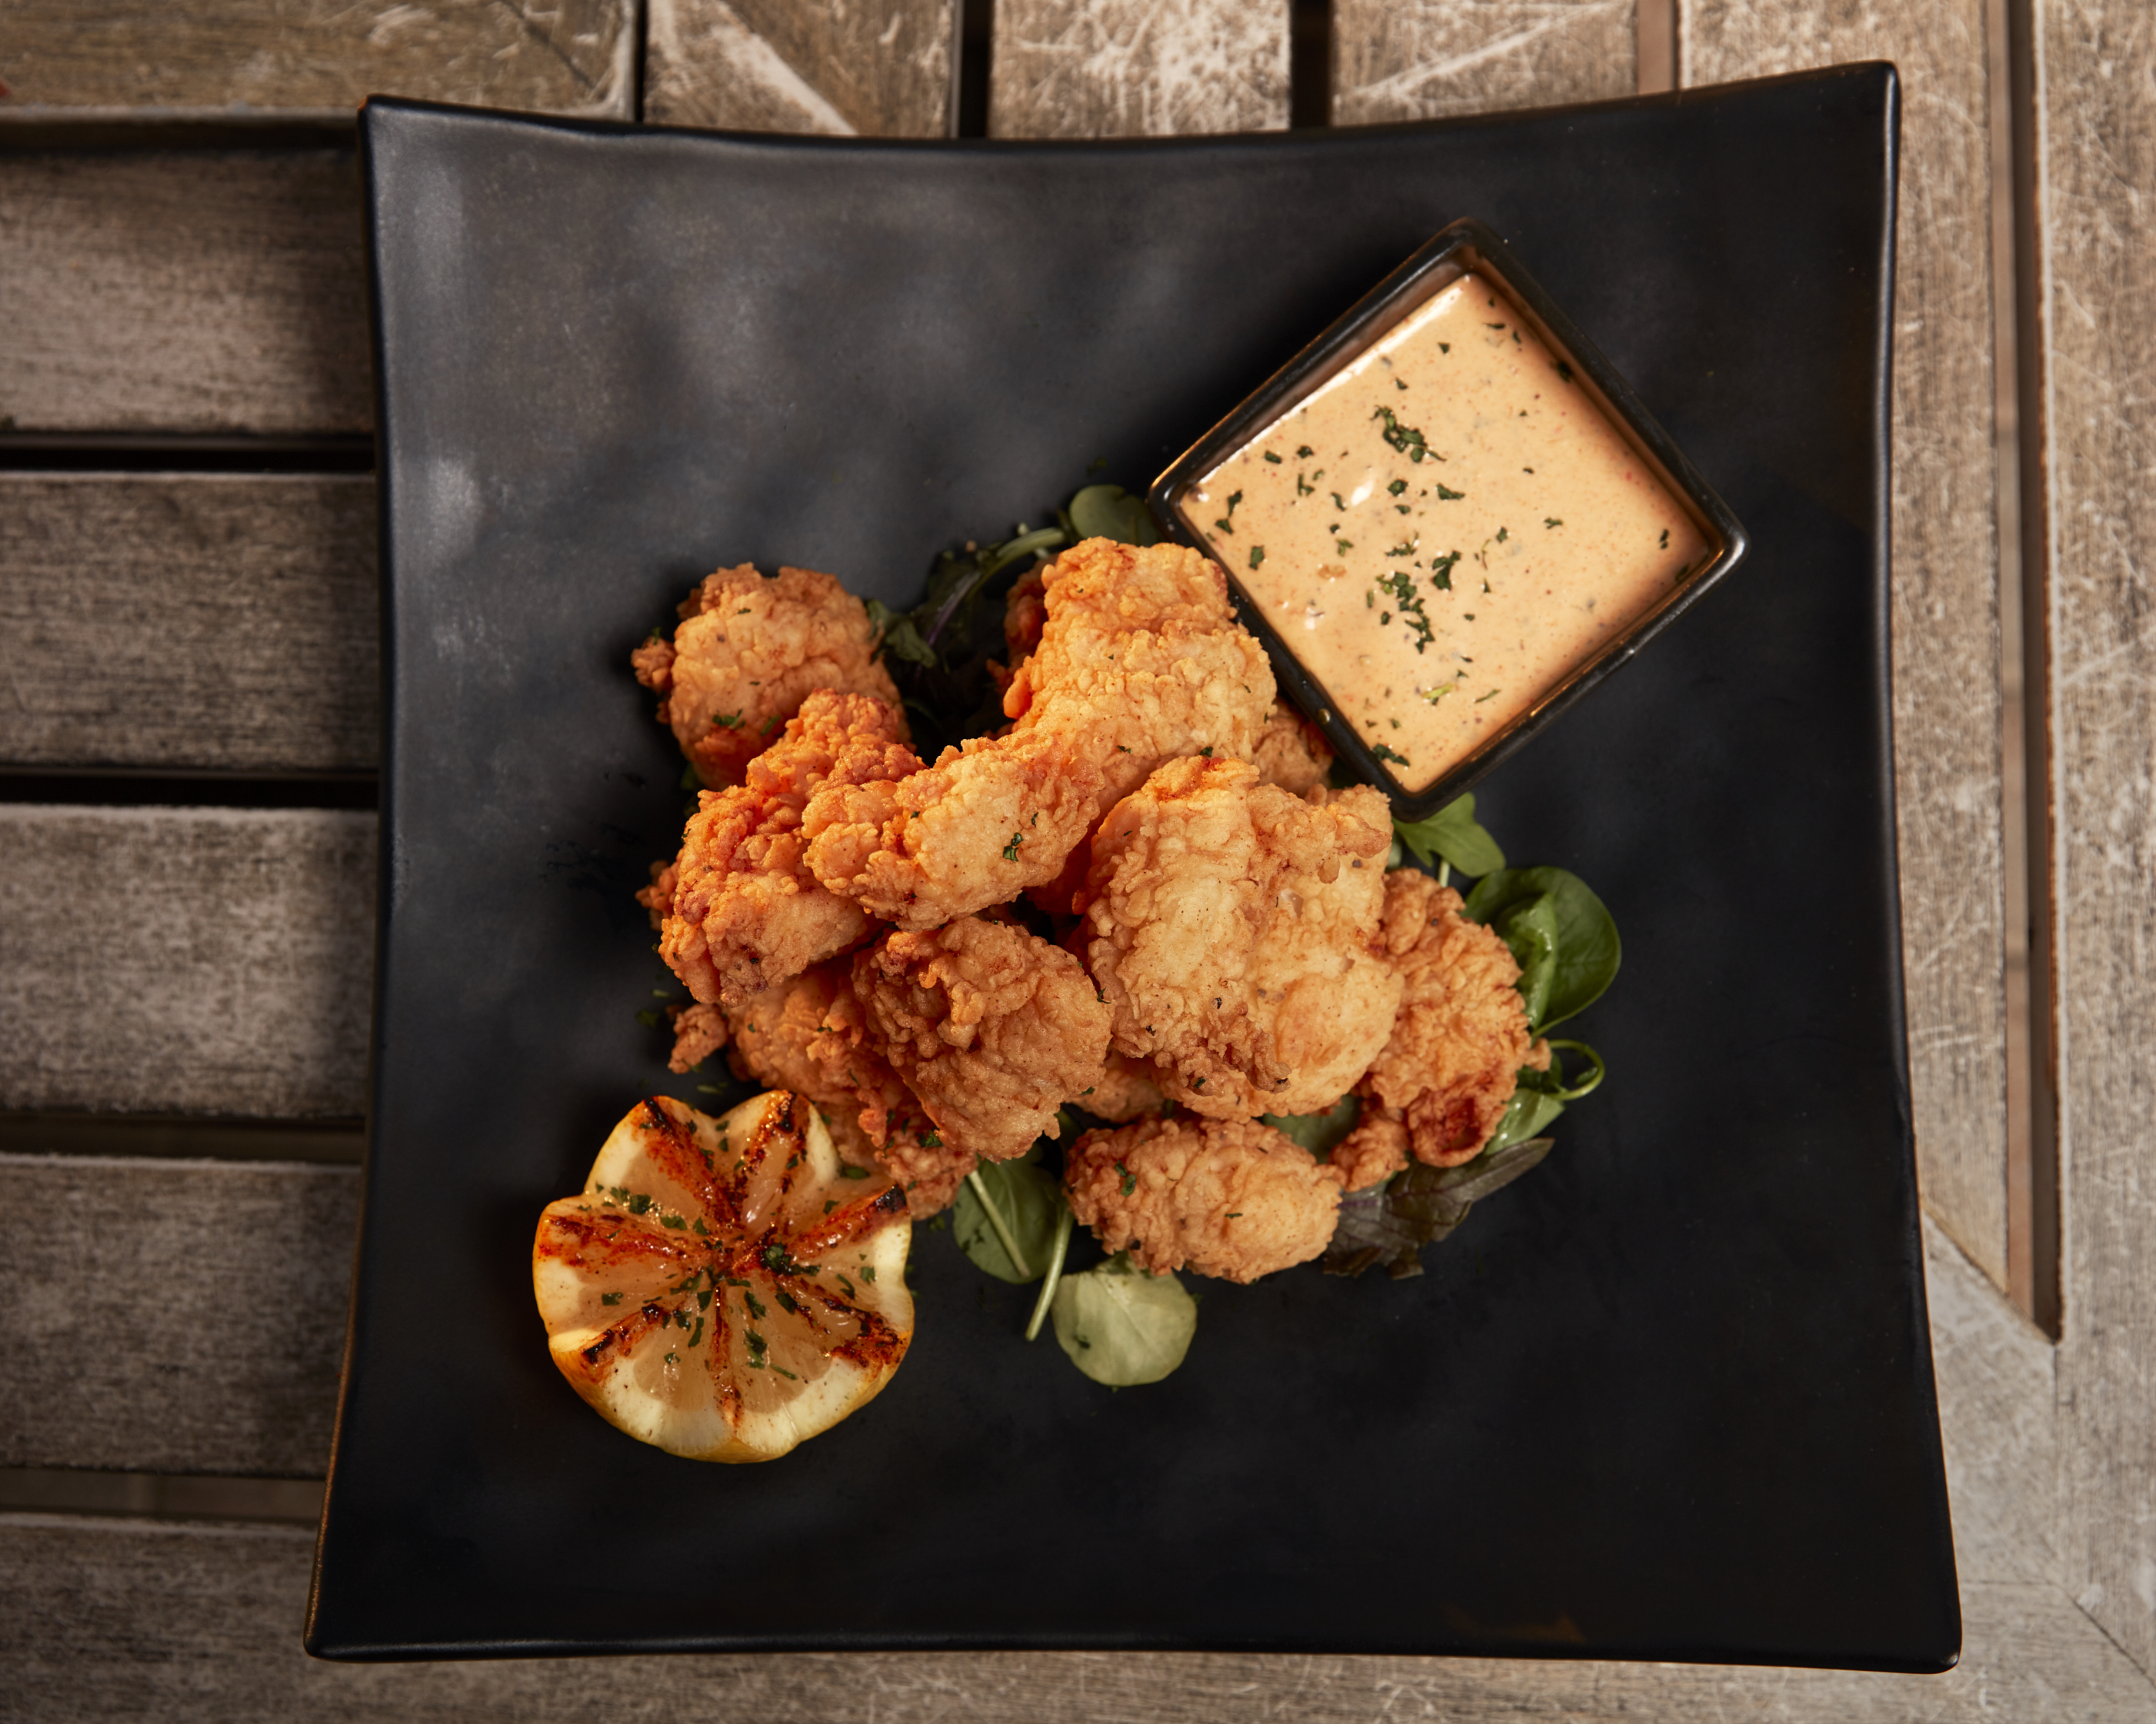 Tampa-based Chef’s Florida Gator Tail Will Take You to Nawlins